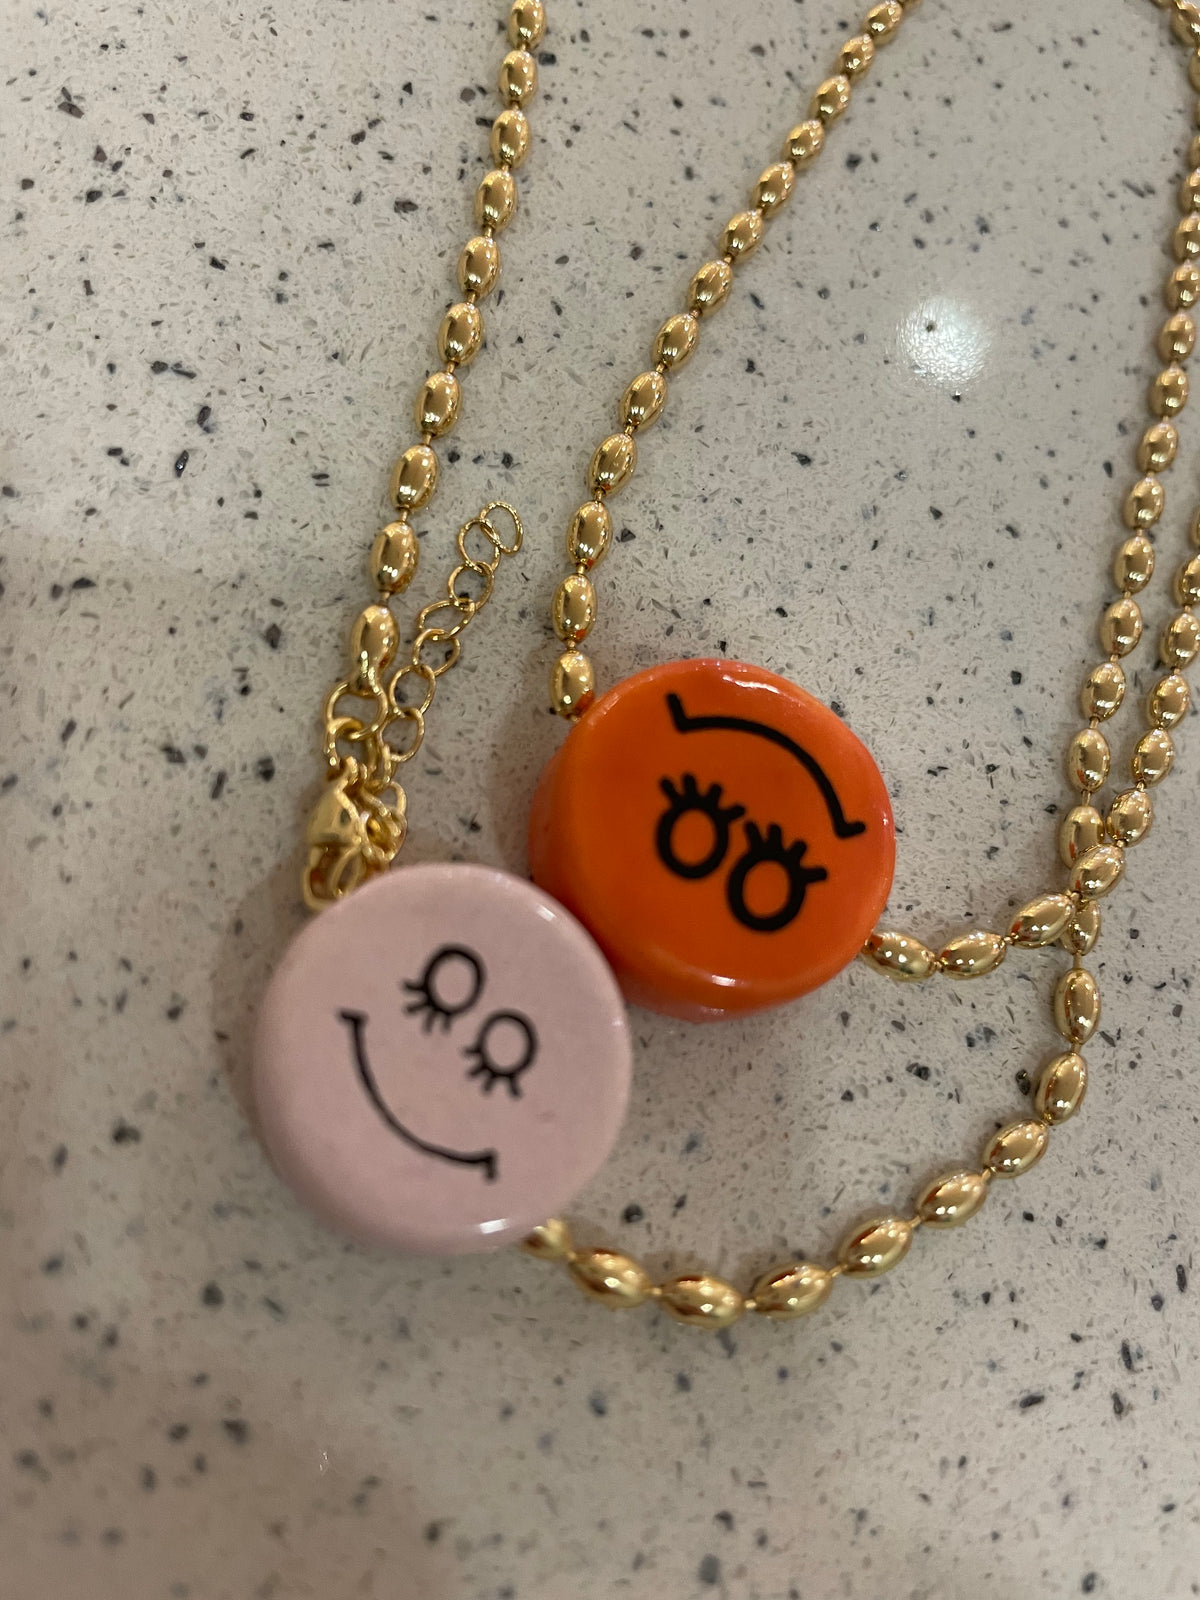 Large Smiley Necklace